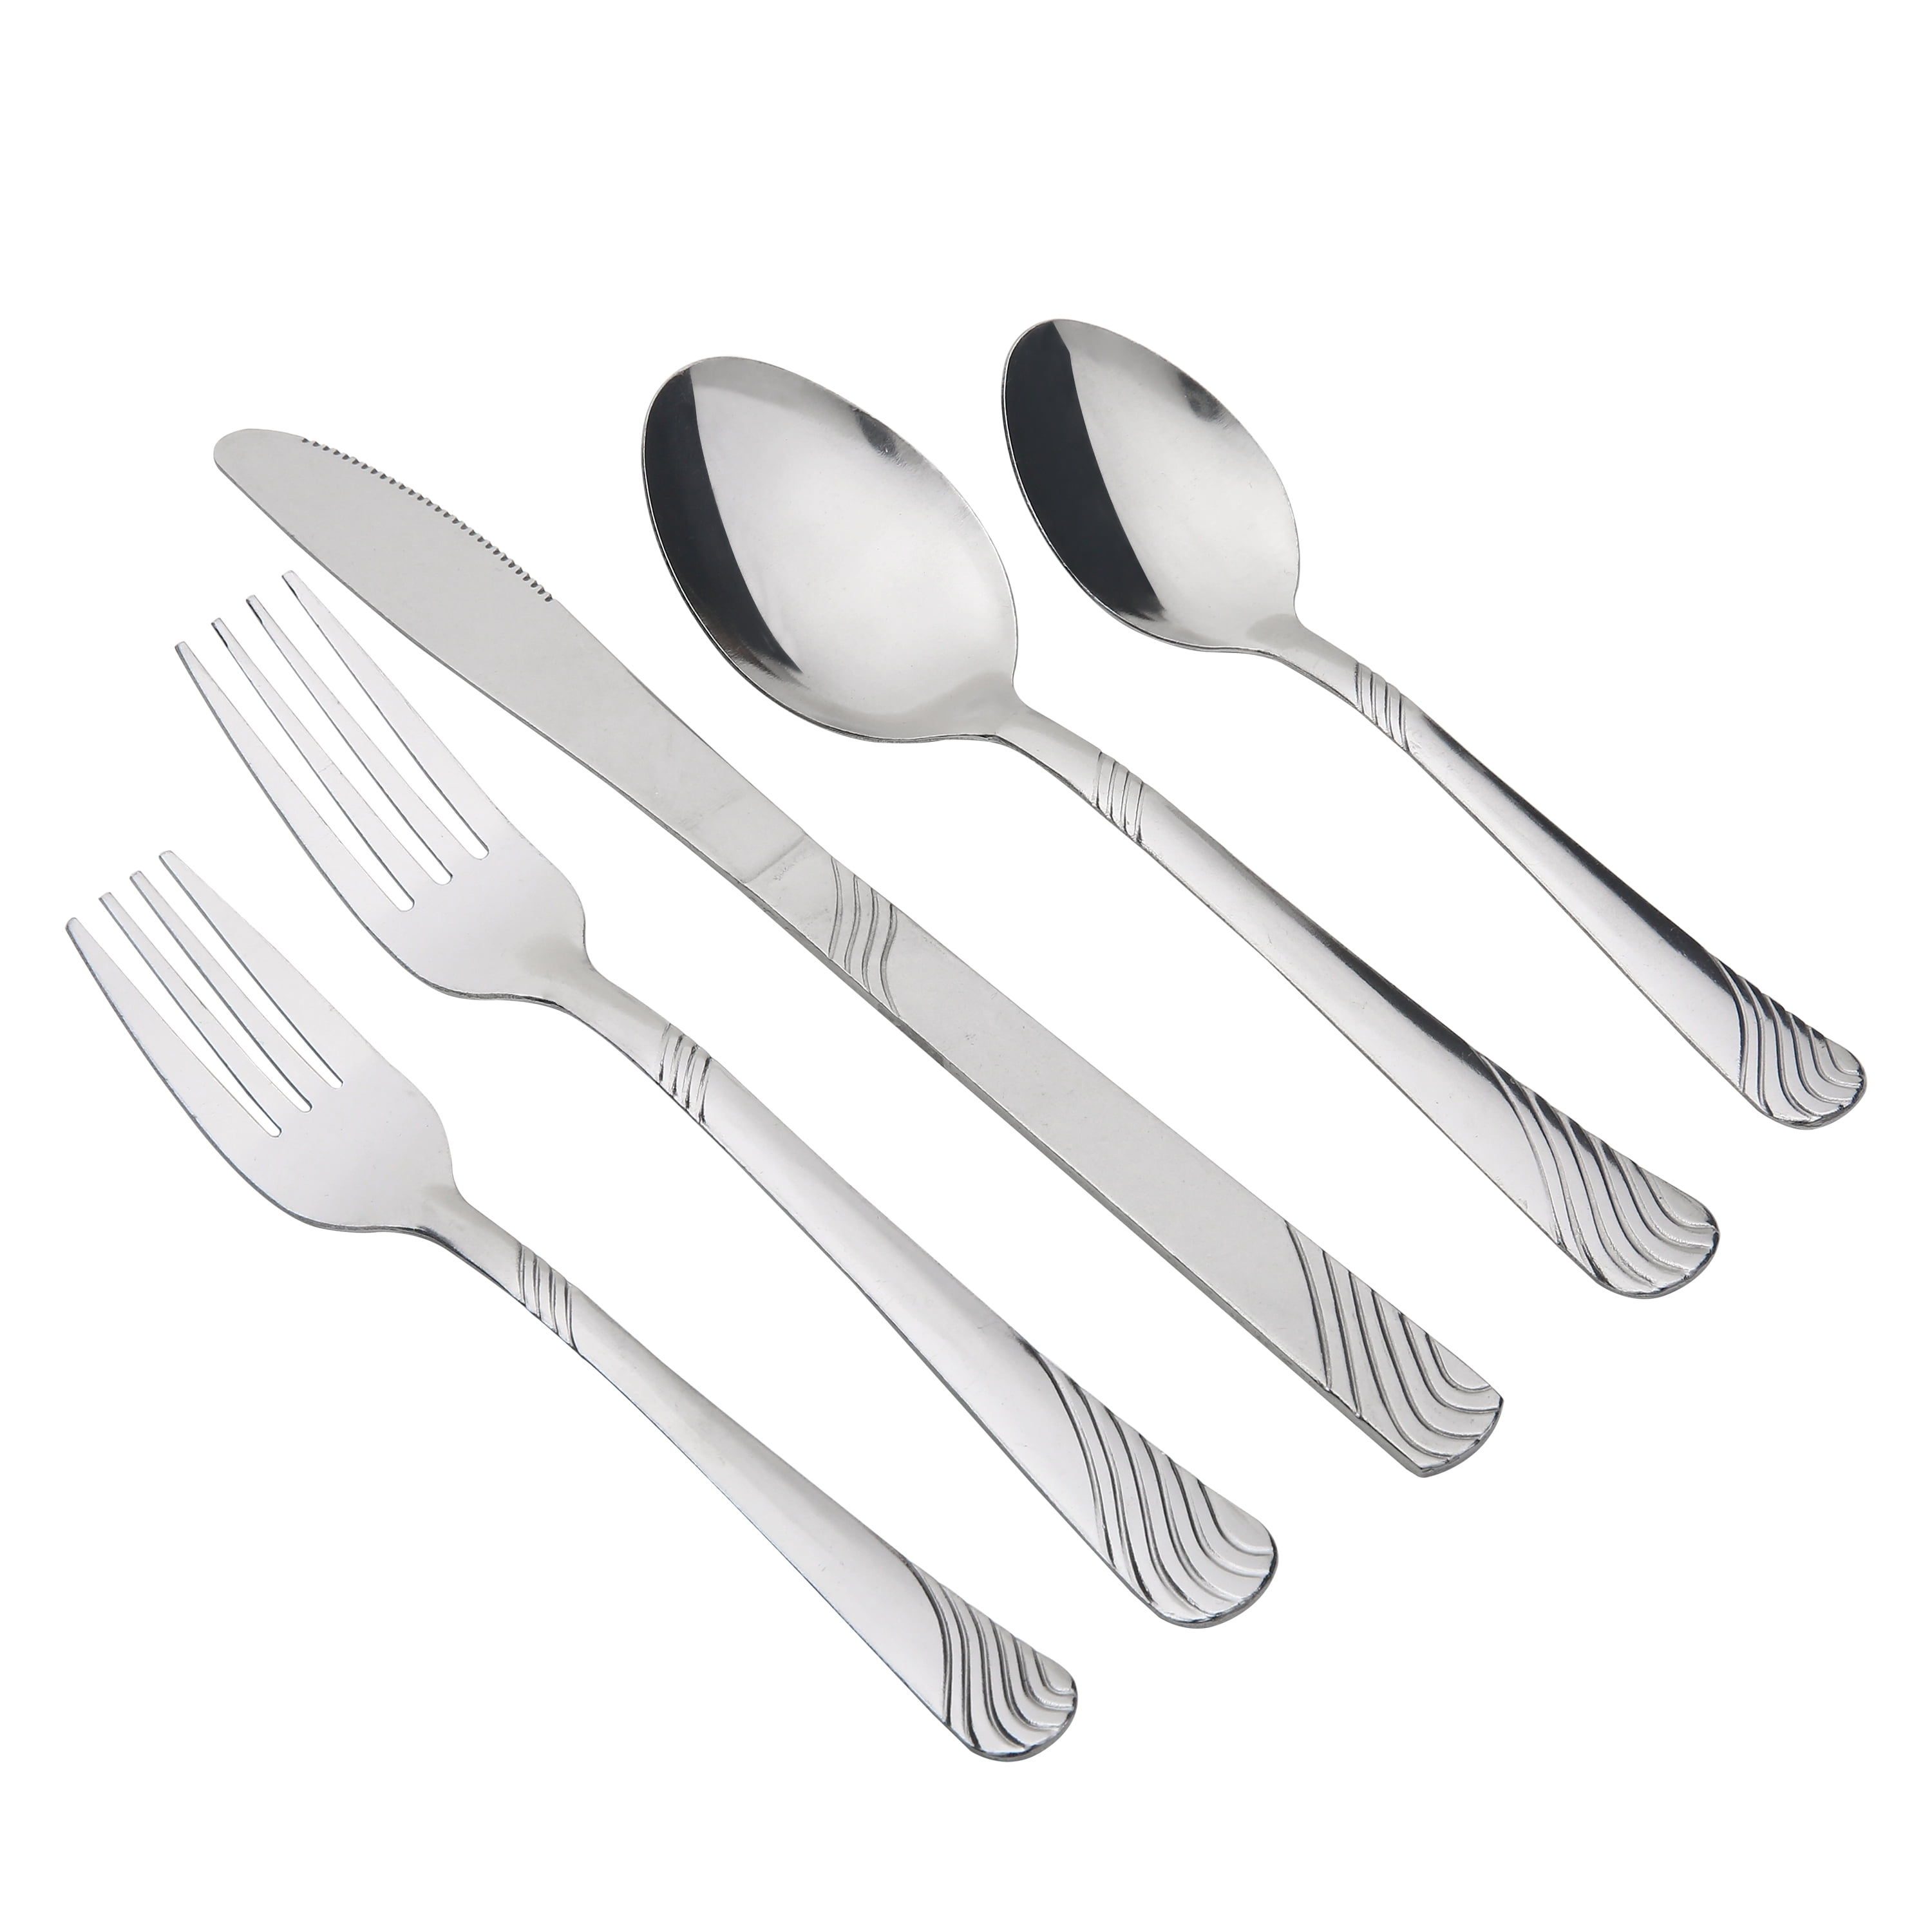 Mainstays Swirl 49 Piece Stainless Steel Flatware and Organizer Tray Value Set Silver